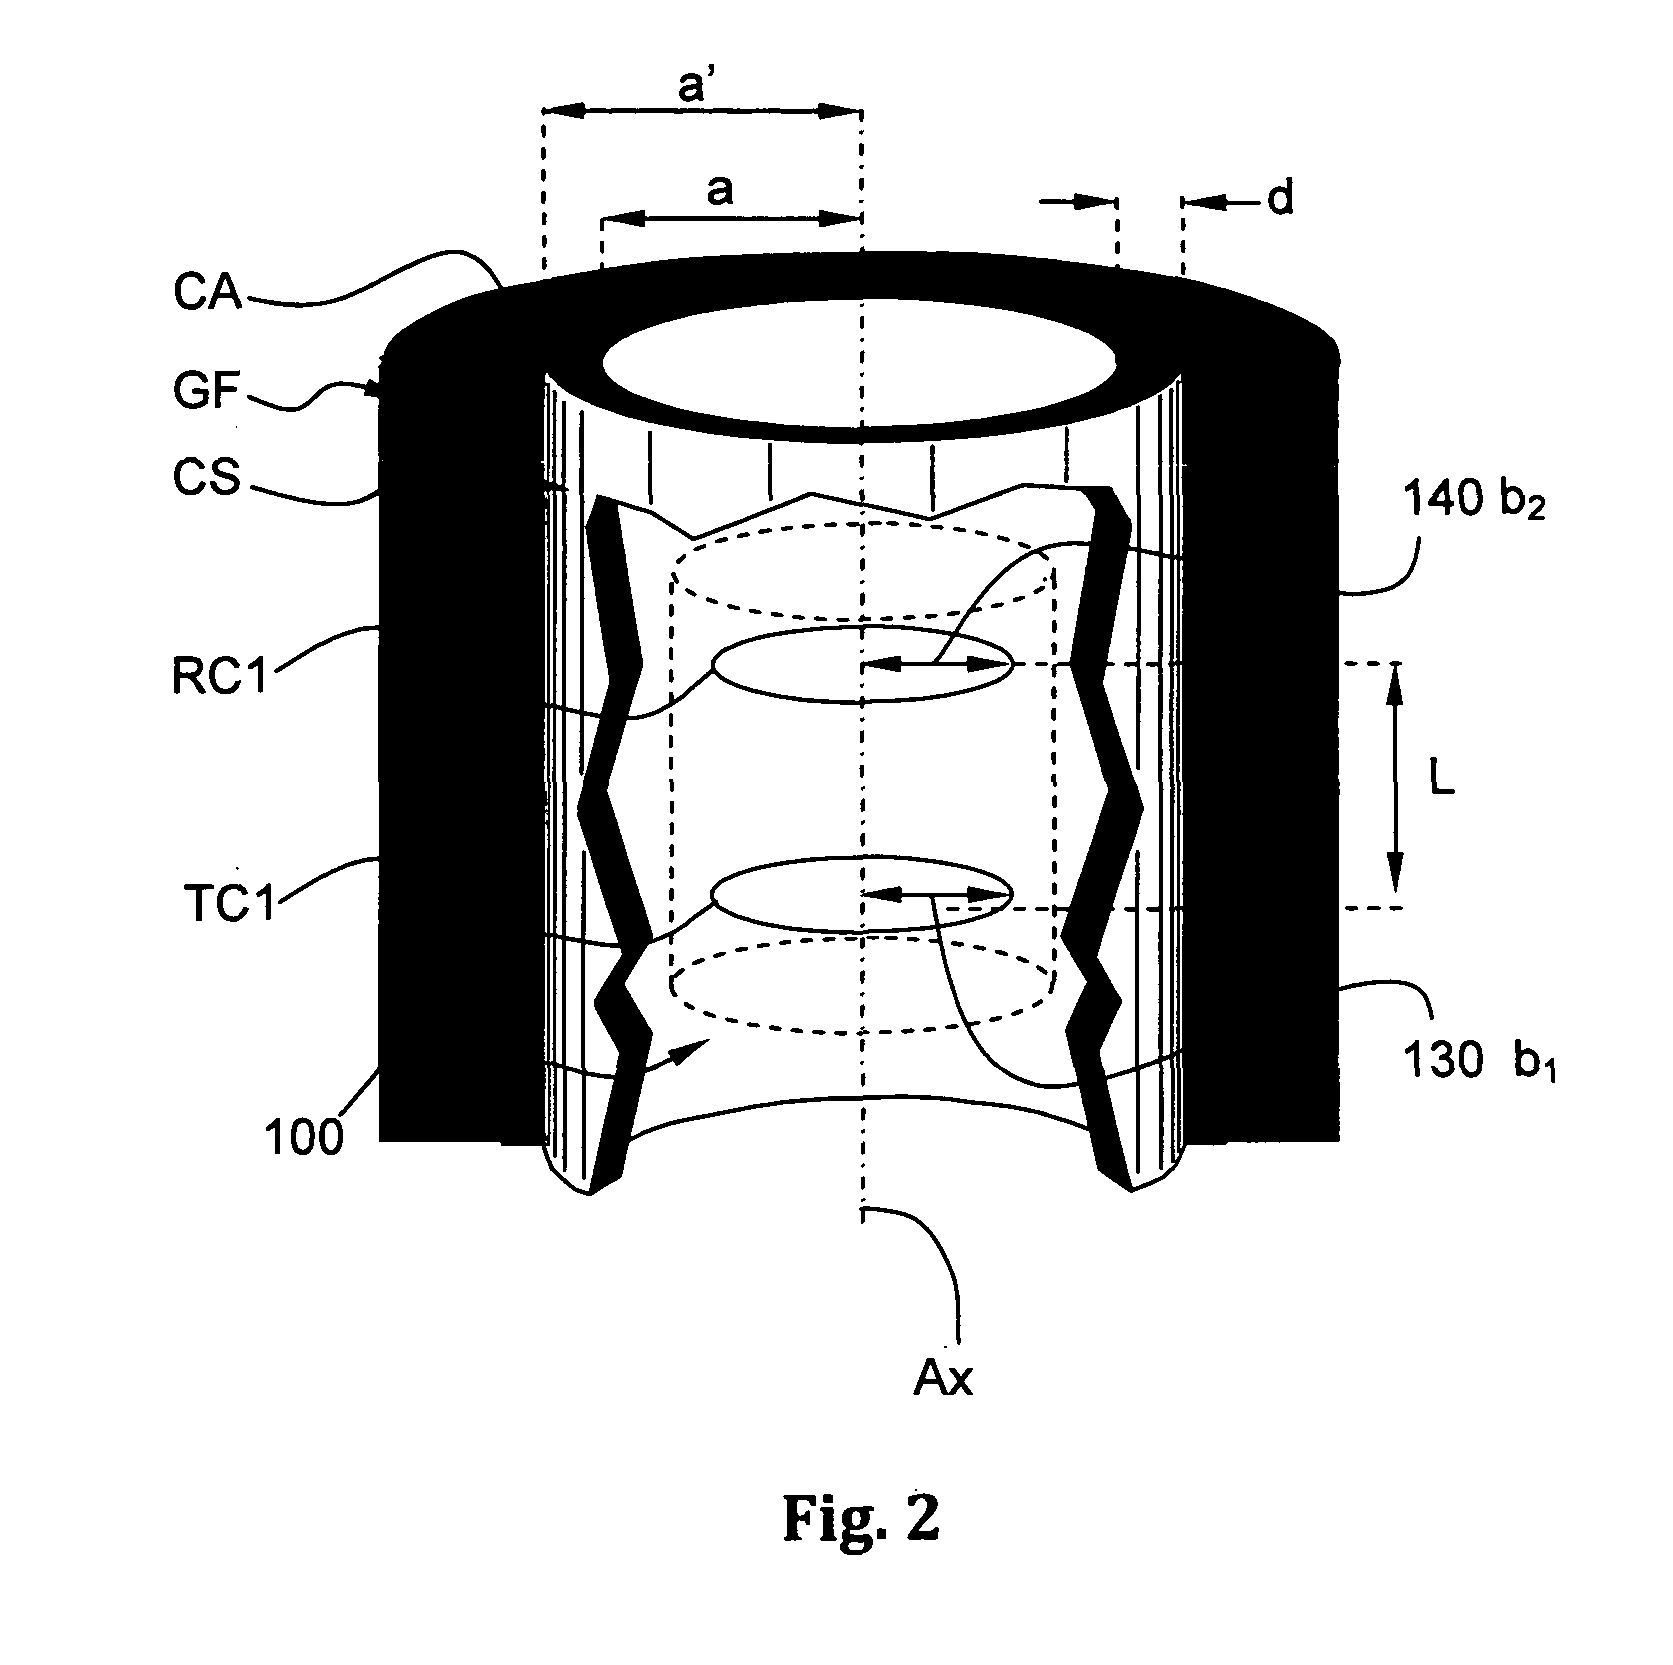 Method and Apparatus for Removal of The Double Indication of Defects in Remote Eddy Current Inspection of Pipes